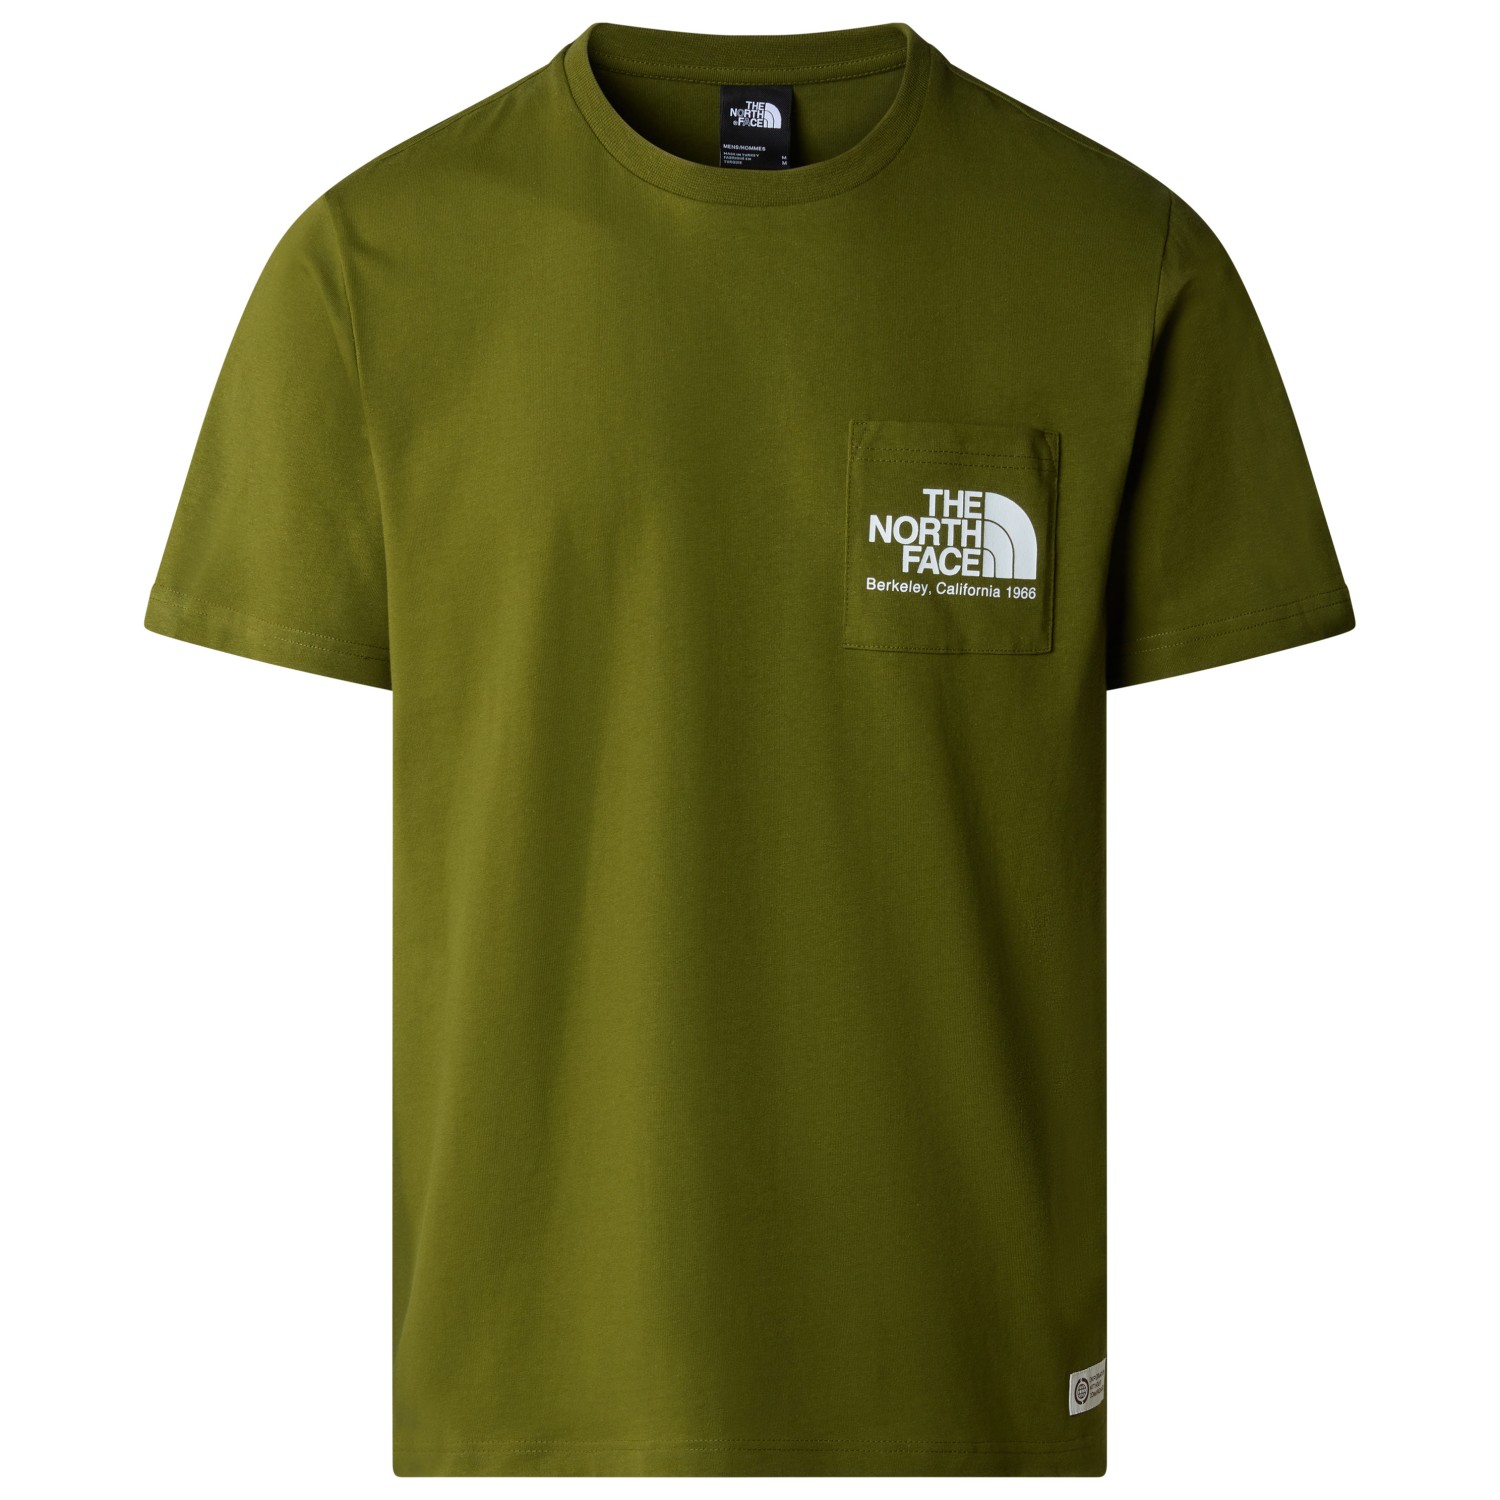 футболка the north face размер s оранжевый Футболка The North Face Berkeley California Pocket S/S Tee, цвет Forest Olive